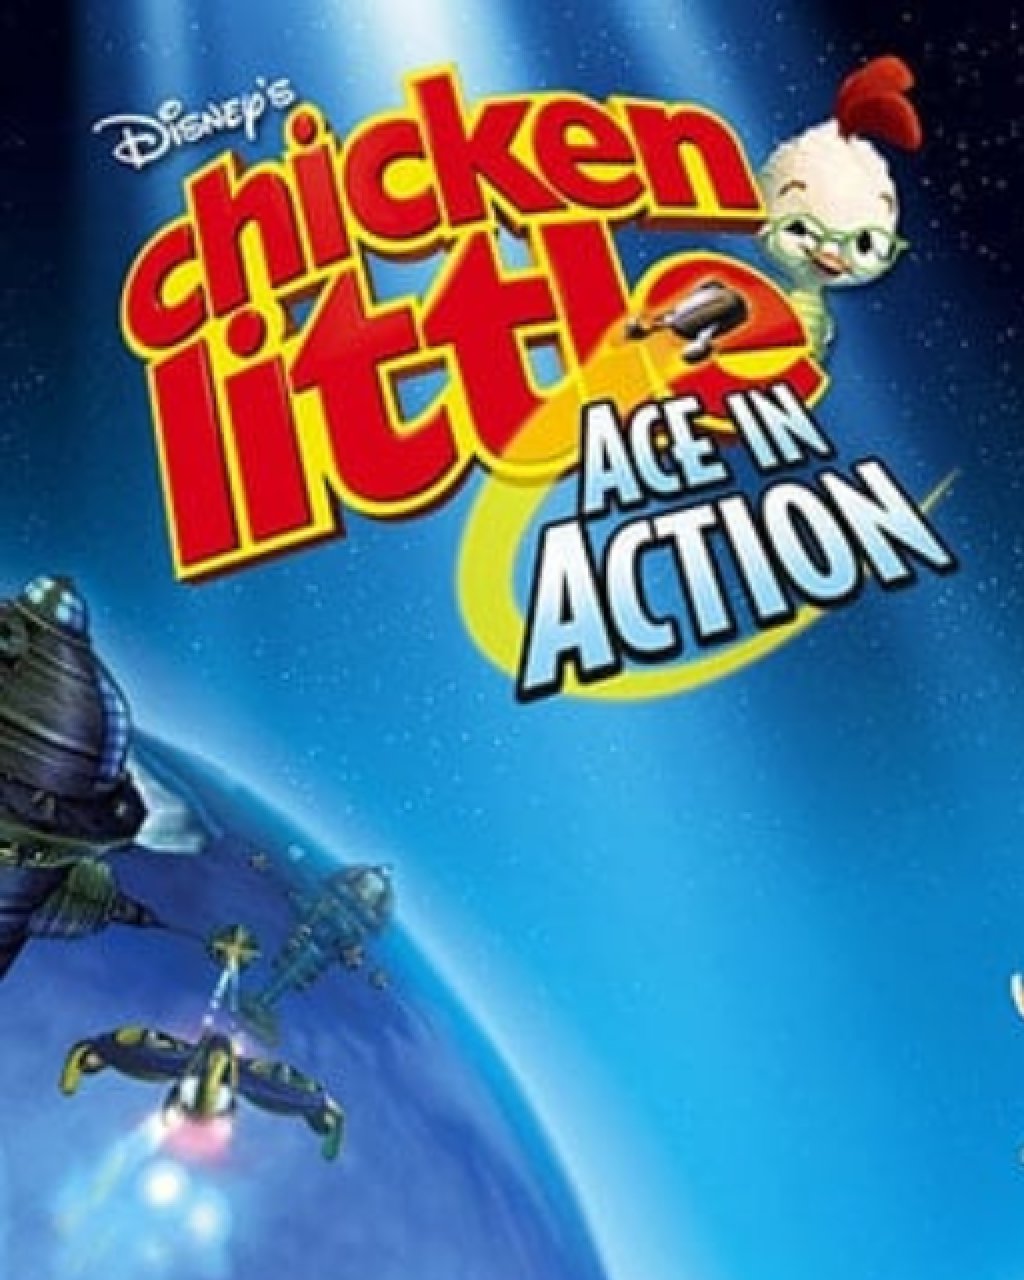 ESD Disney's Chicken Little Ace in Action